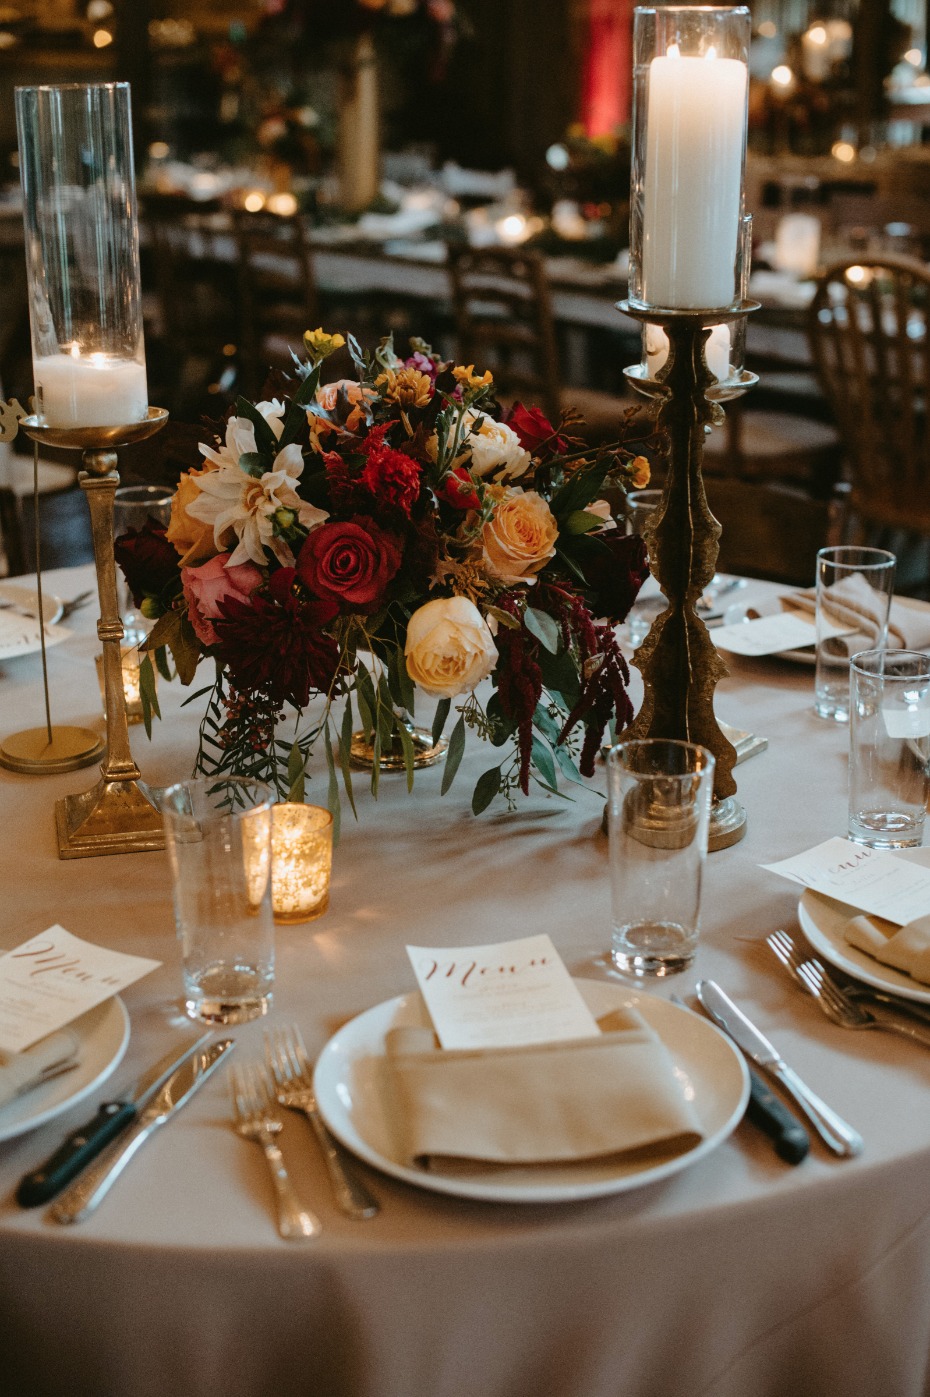 Mix and match your centerpieces for added depth